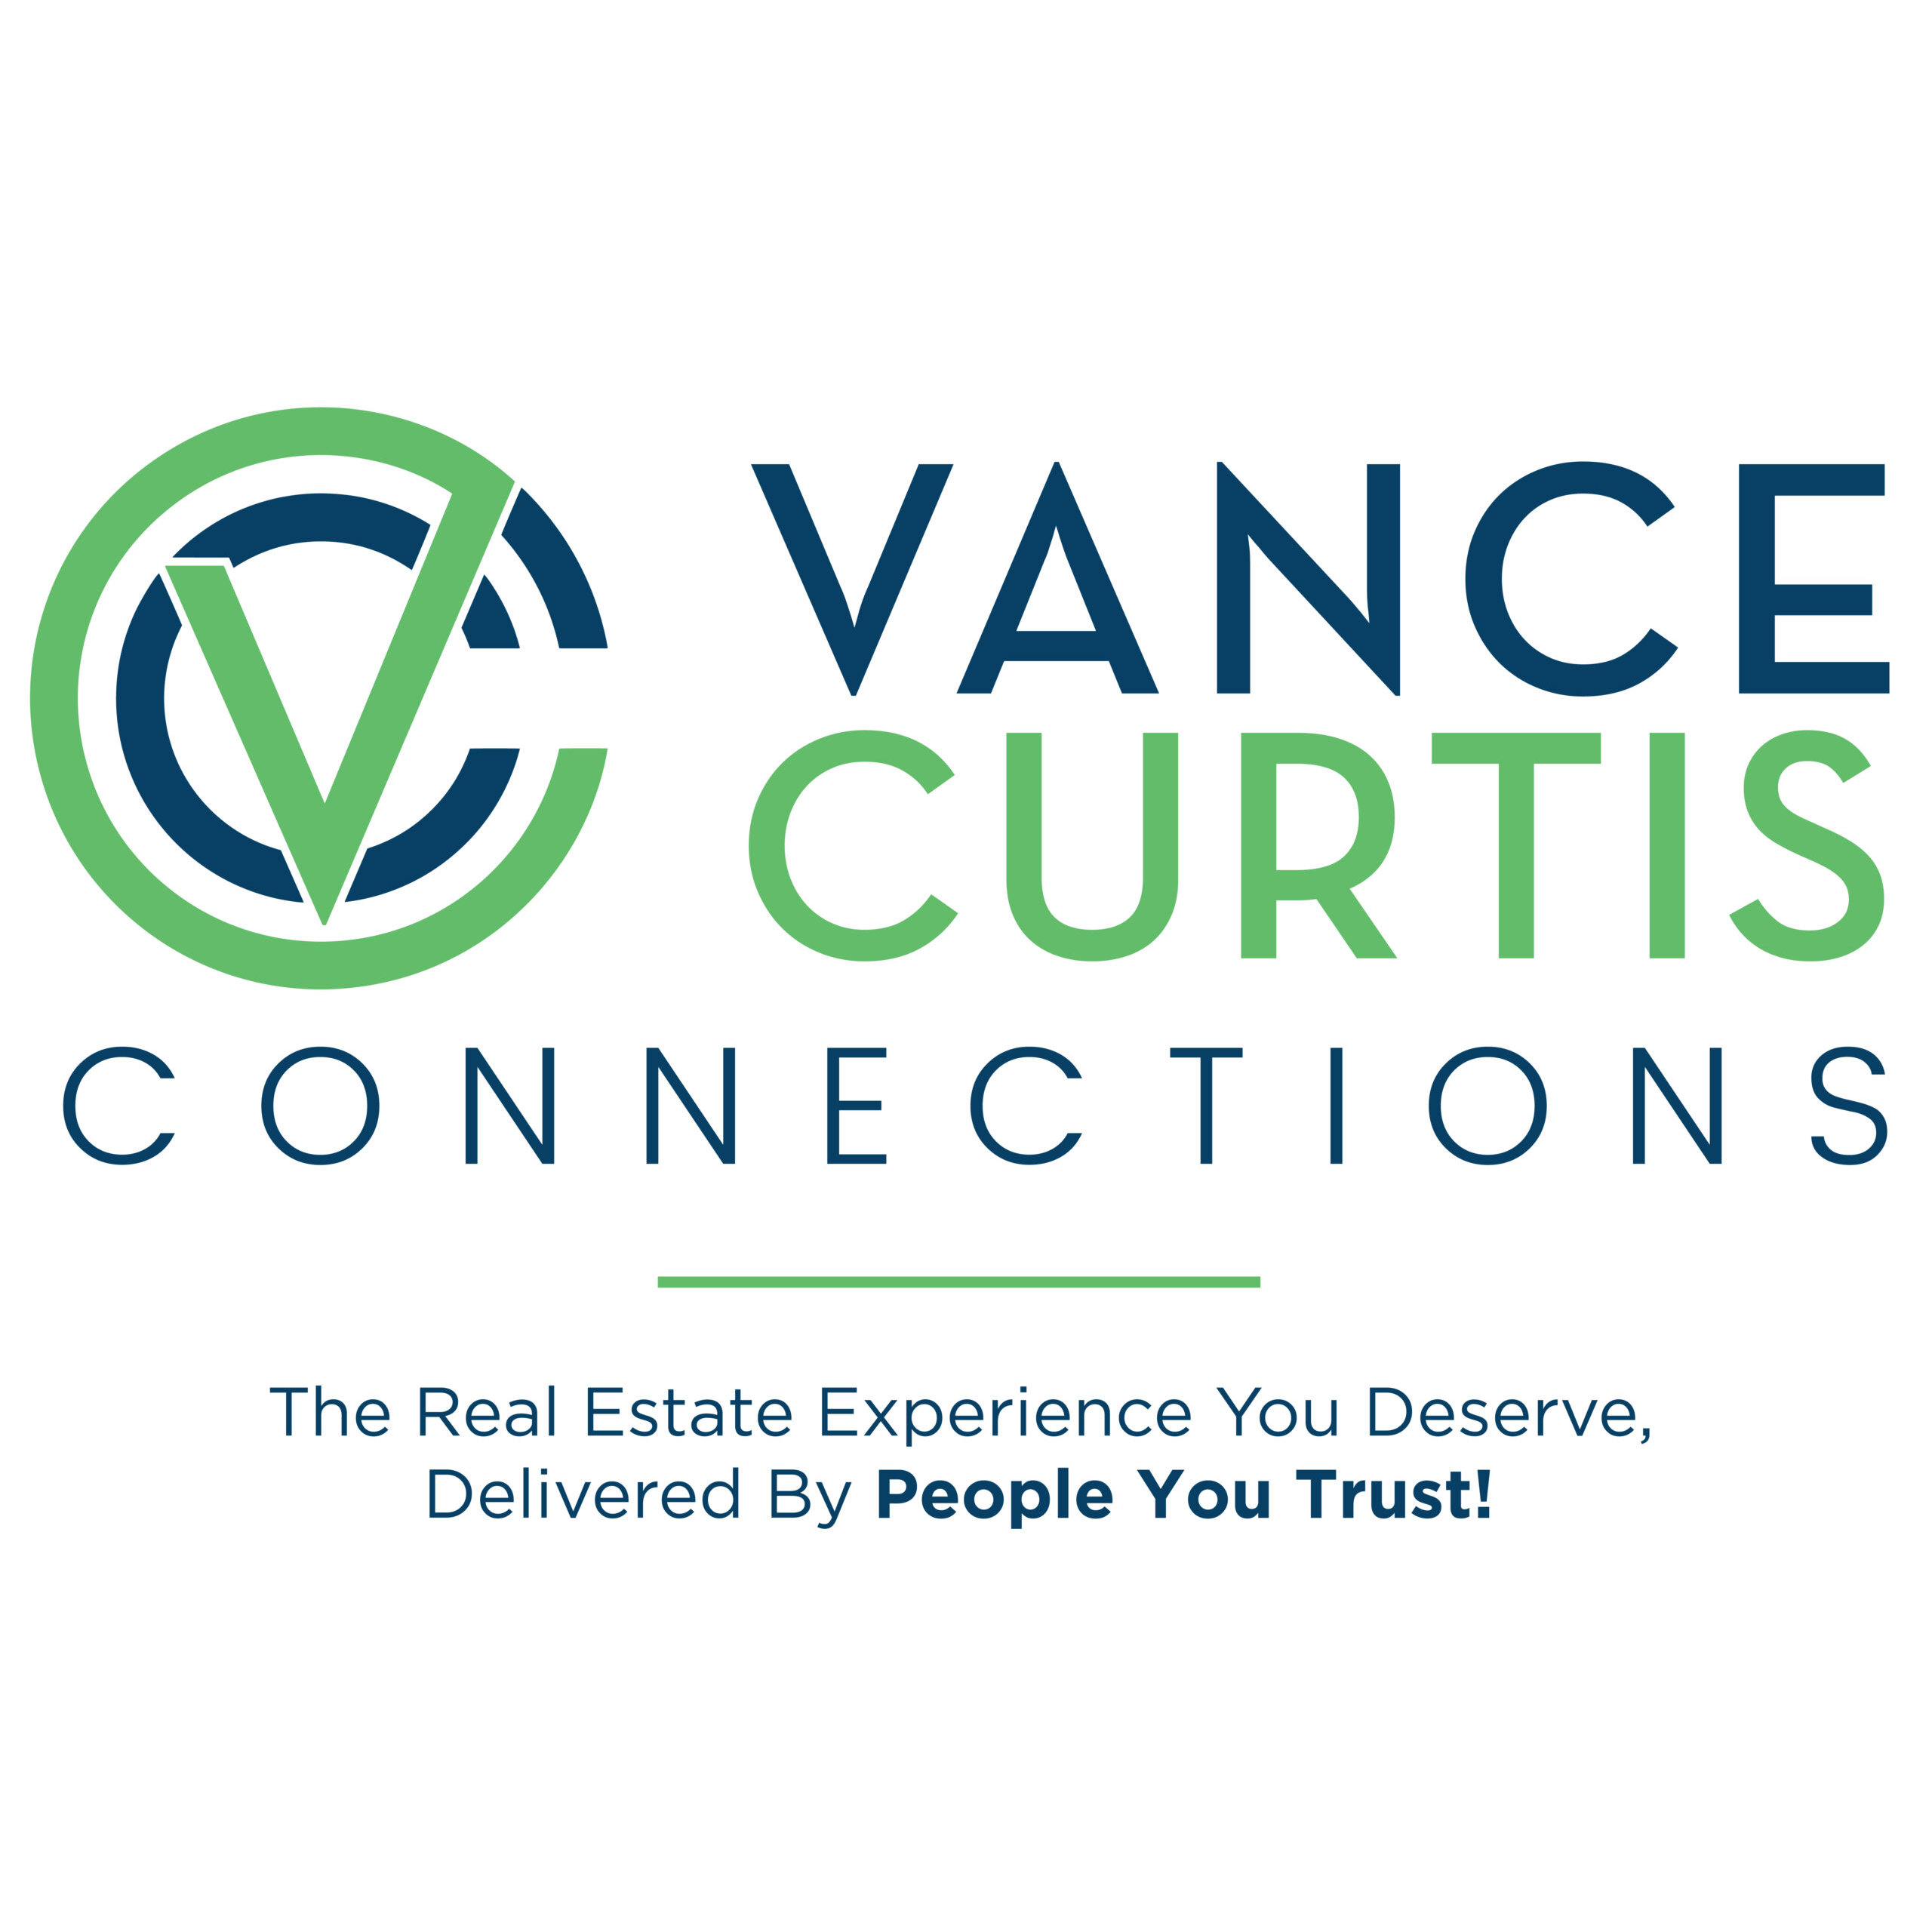 Gary Vance - Vance Curtis Connections Real Estate Team / CO EXP Realty